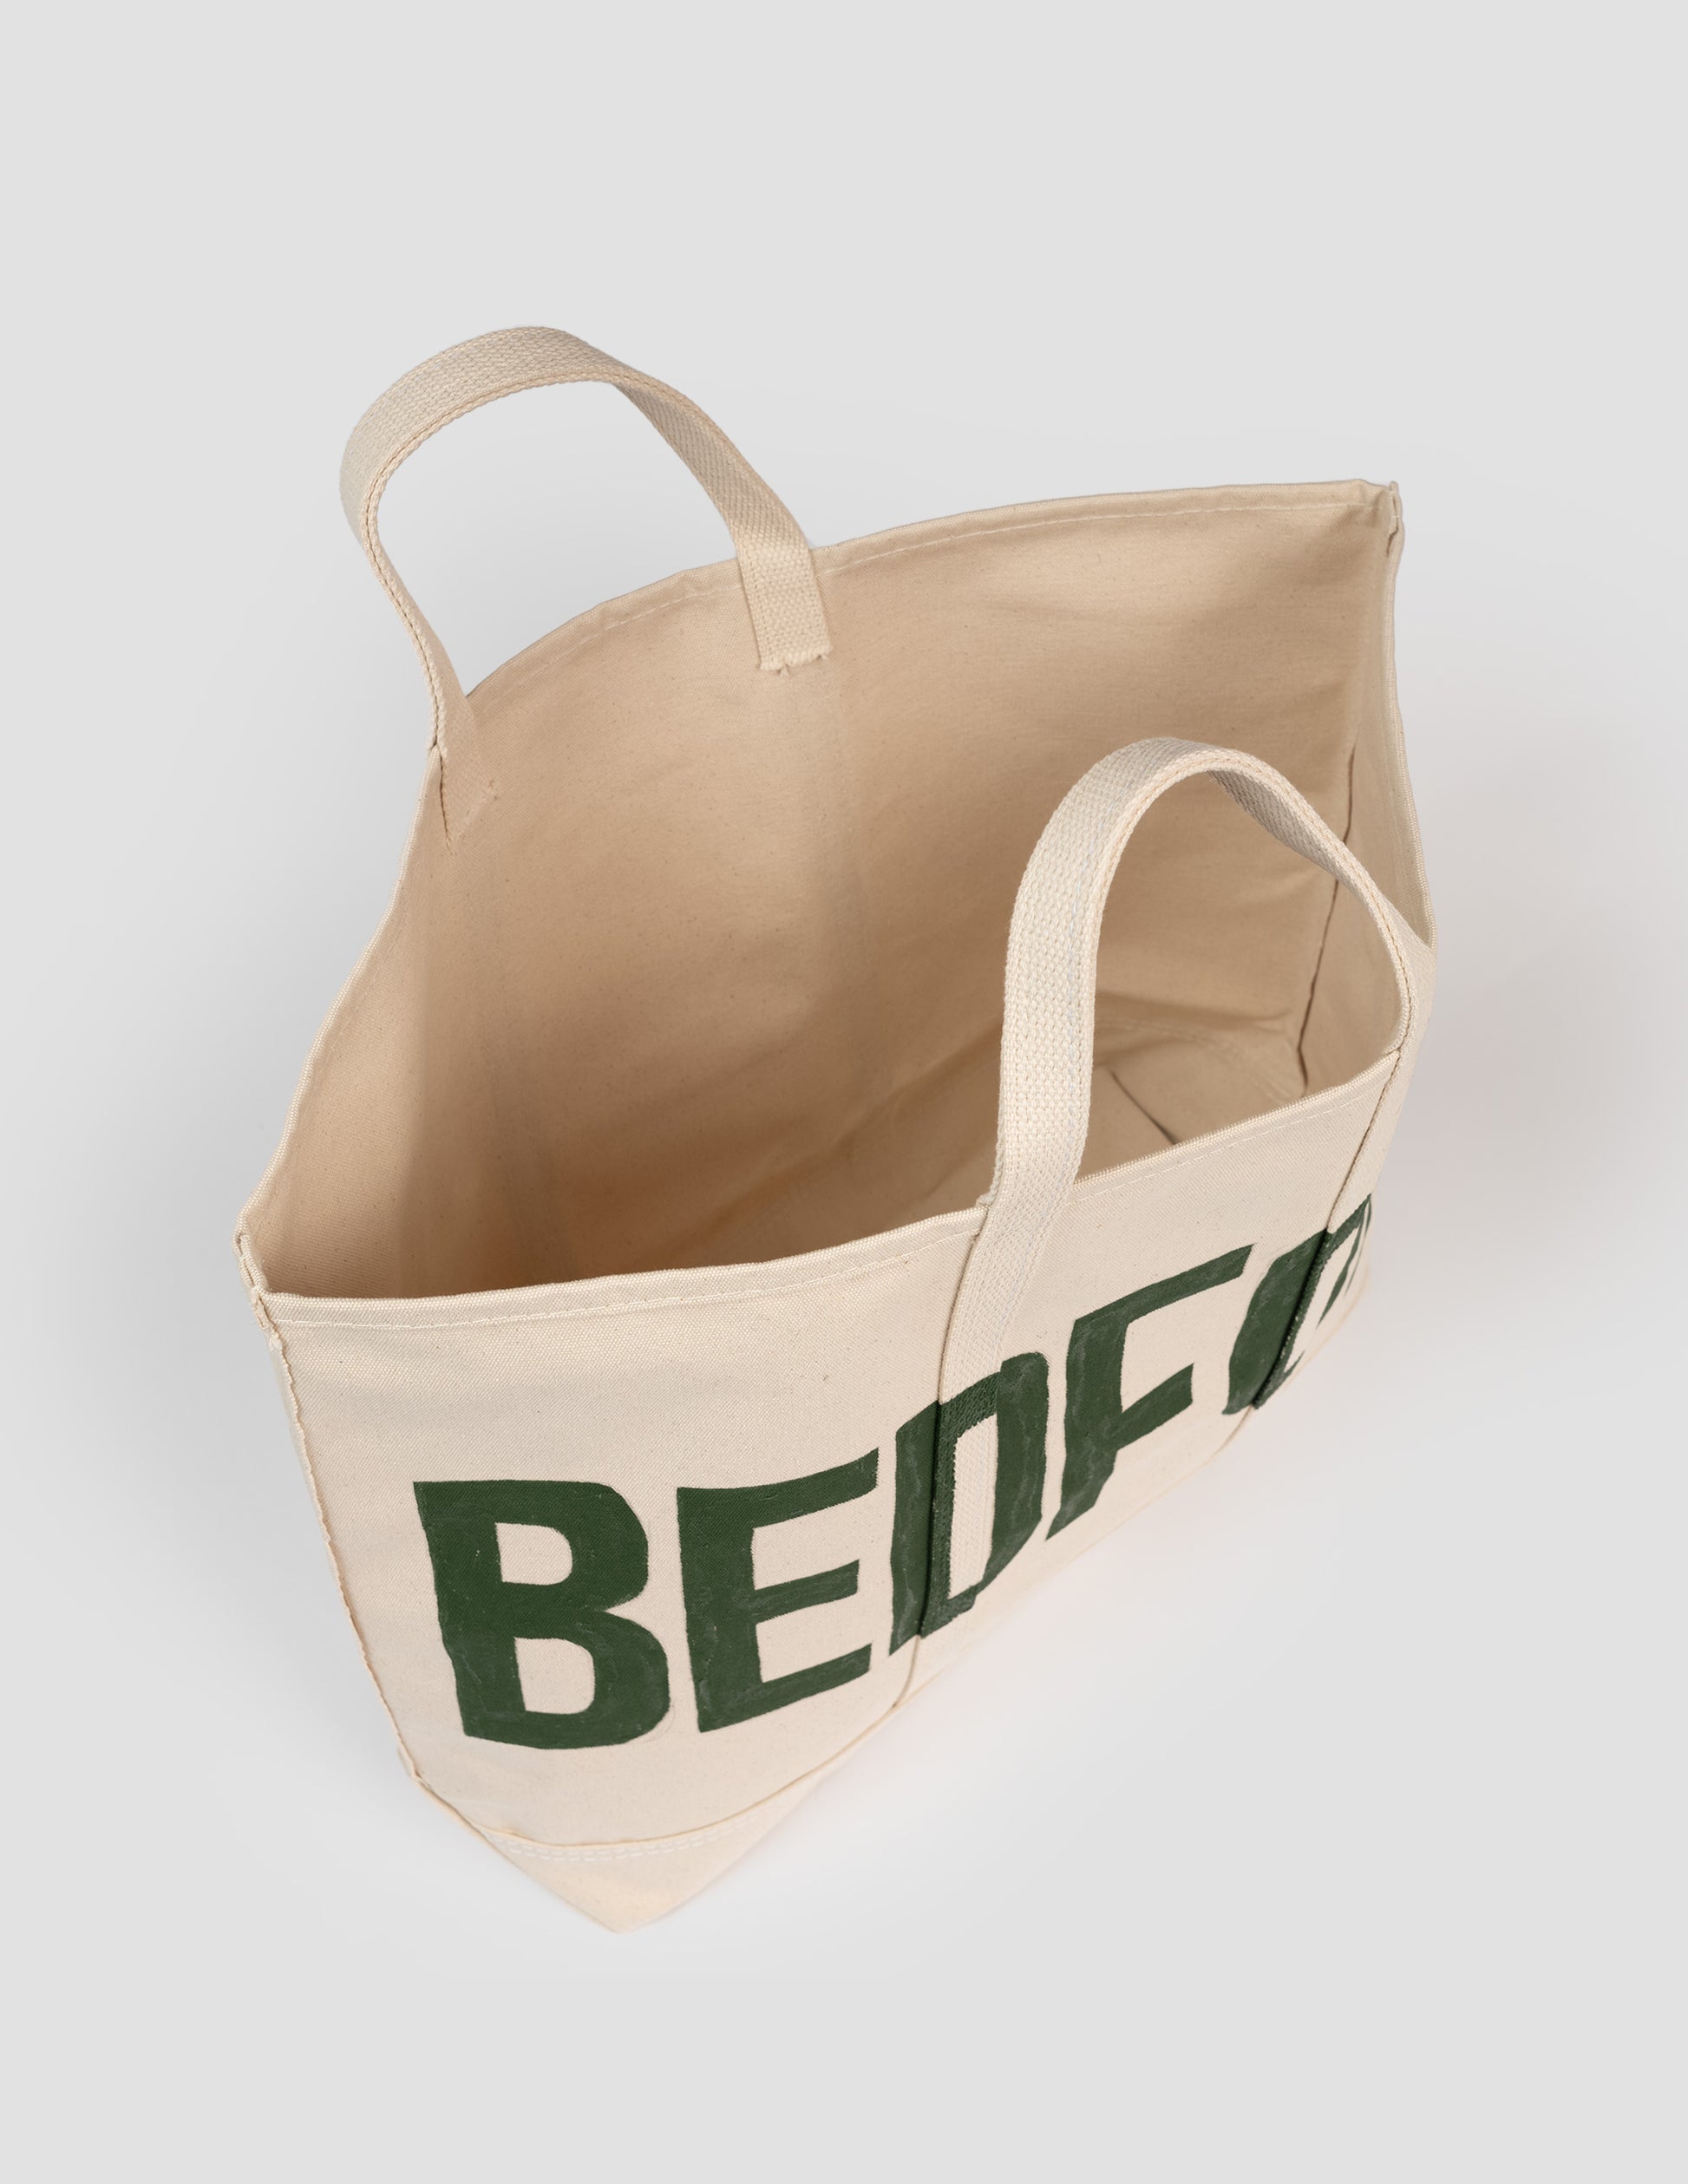 Rivay Hand Painted Bedford Steele™ Tote